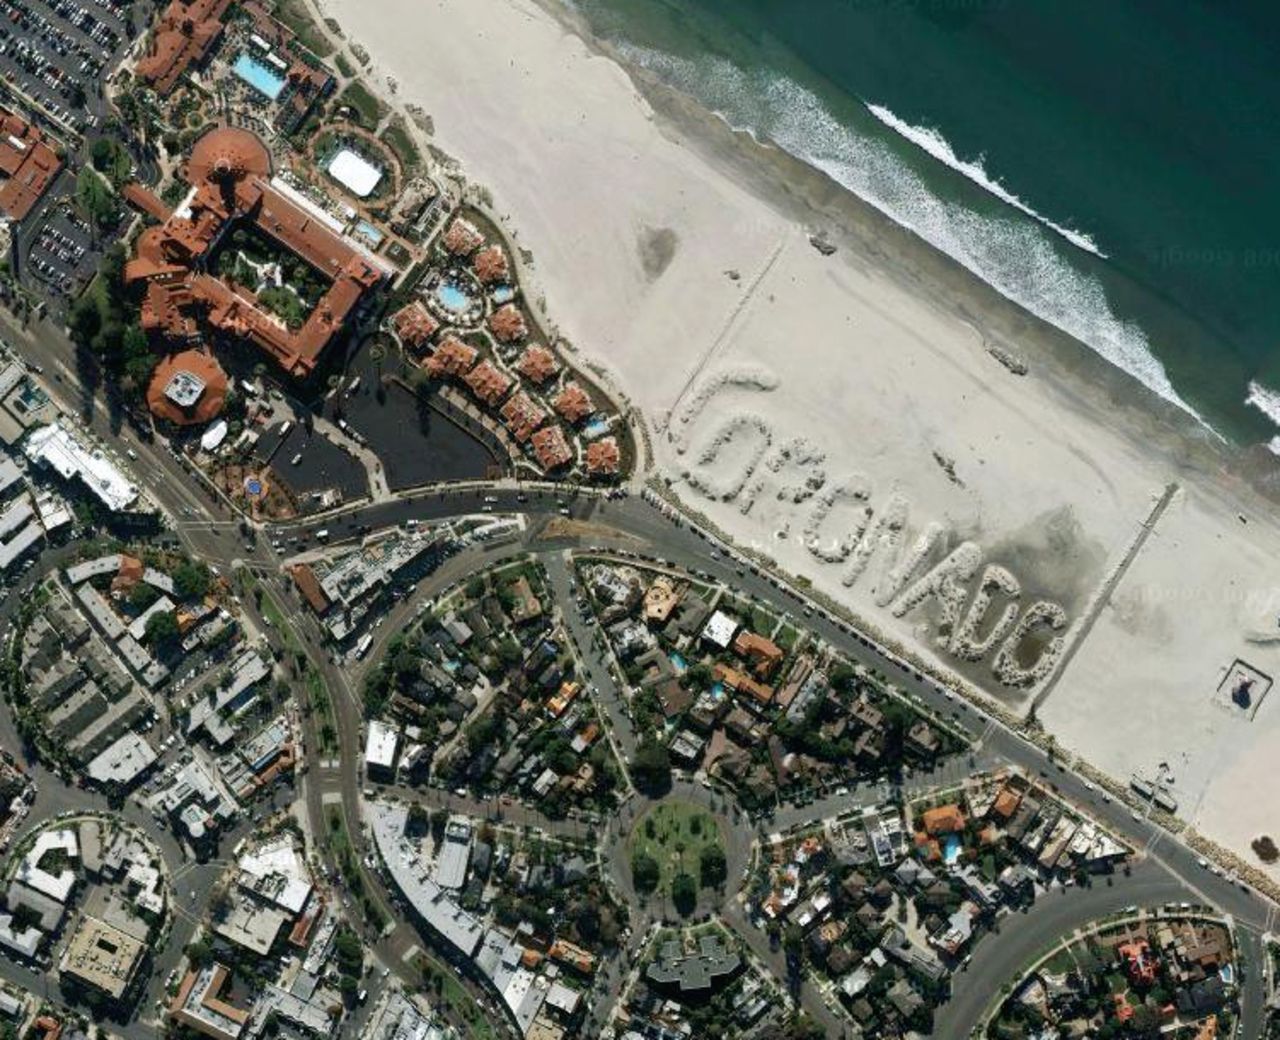 Coronado Beach is easily identifiable by air, thanks to a sand sculpture built by a city employee in 1988.